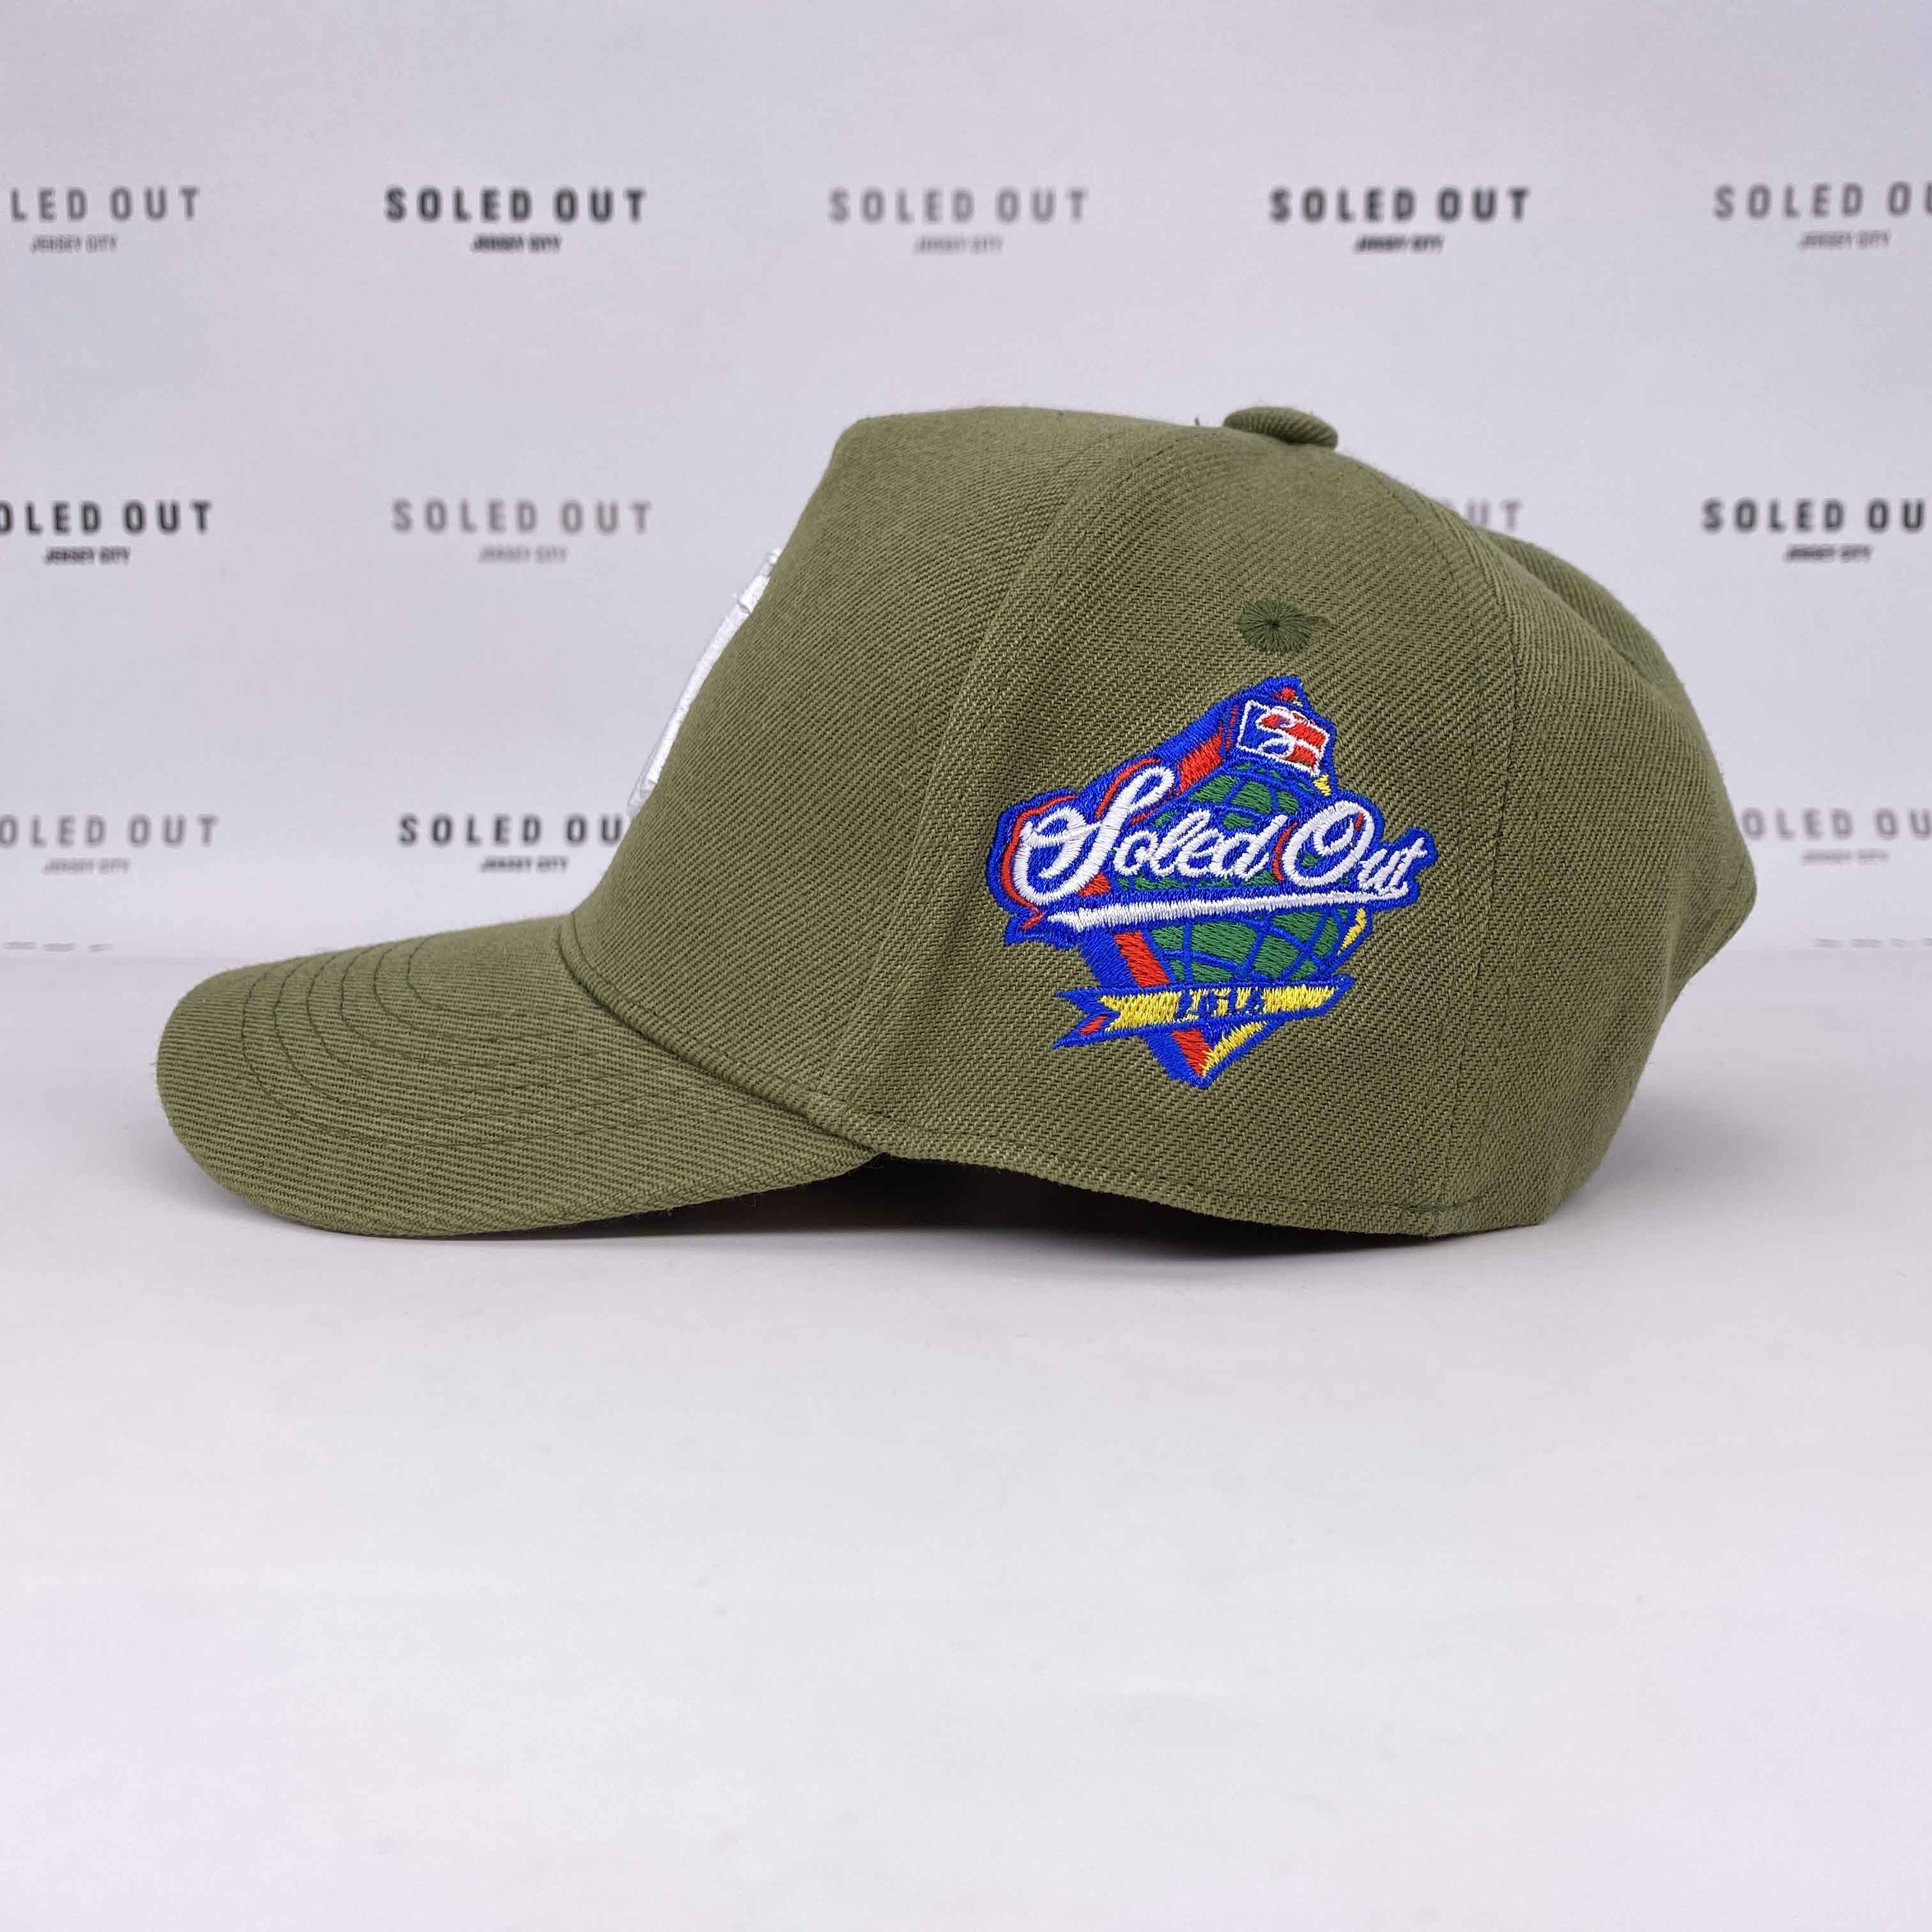 Soled Out (KIDS) Snapback "ACRYLIC WOOL BLEND" New Military Green Size OS